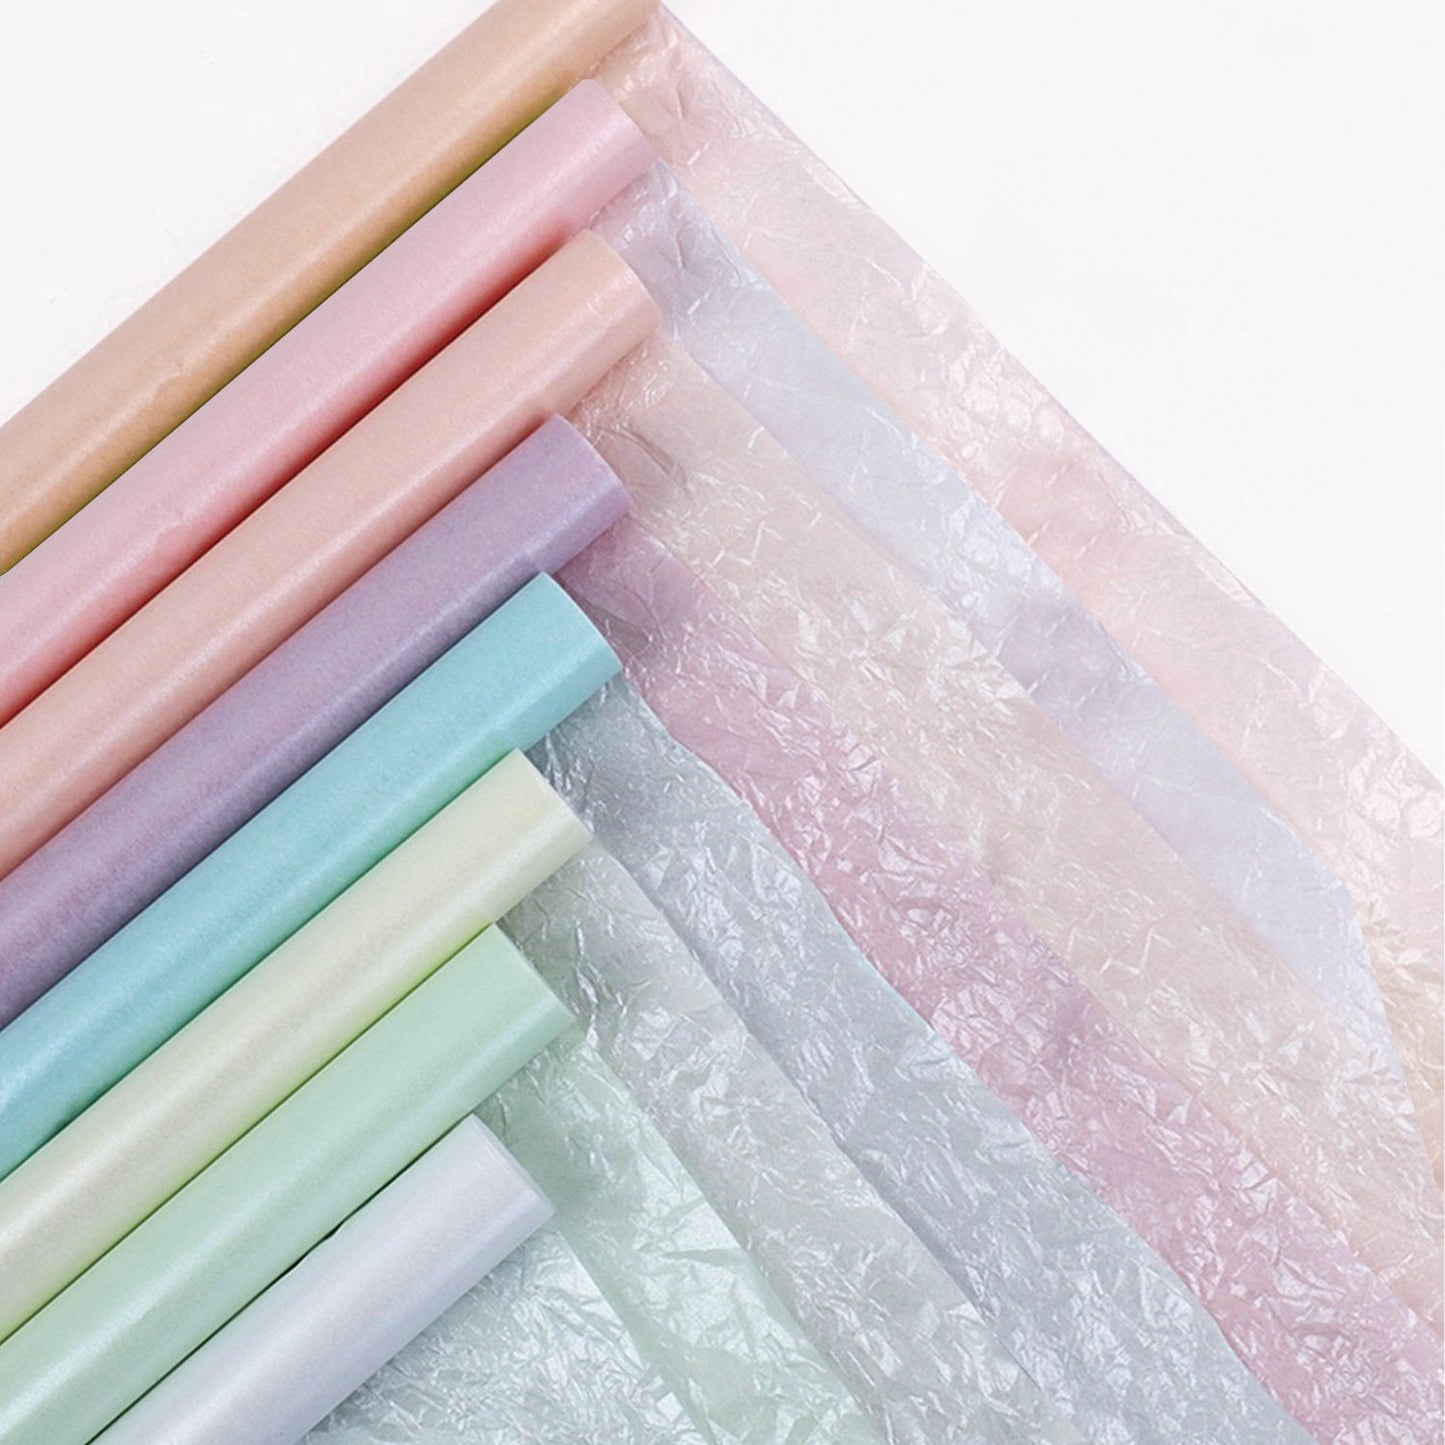 100sheets Light Blue 19.7x27.6 inches Pearlized Tissue Paper; $0.40/pc